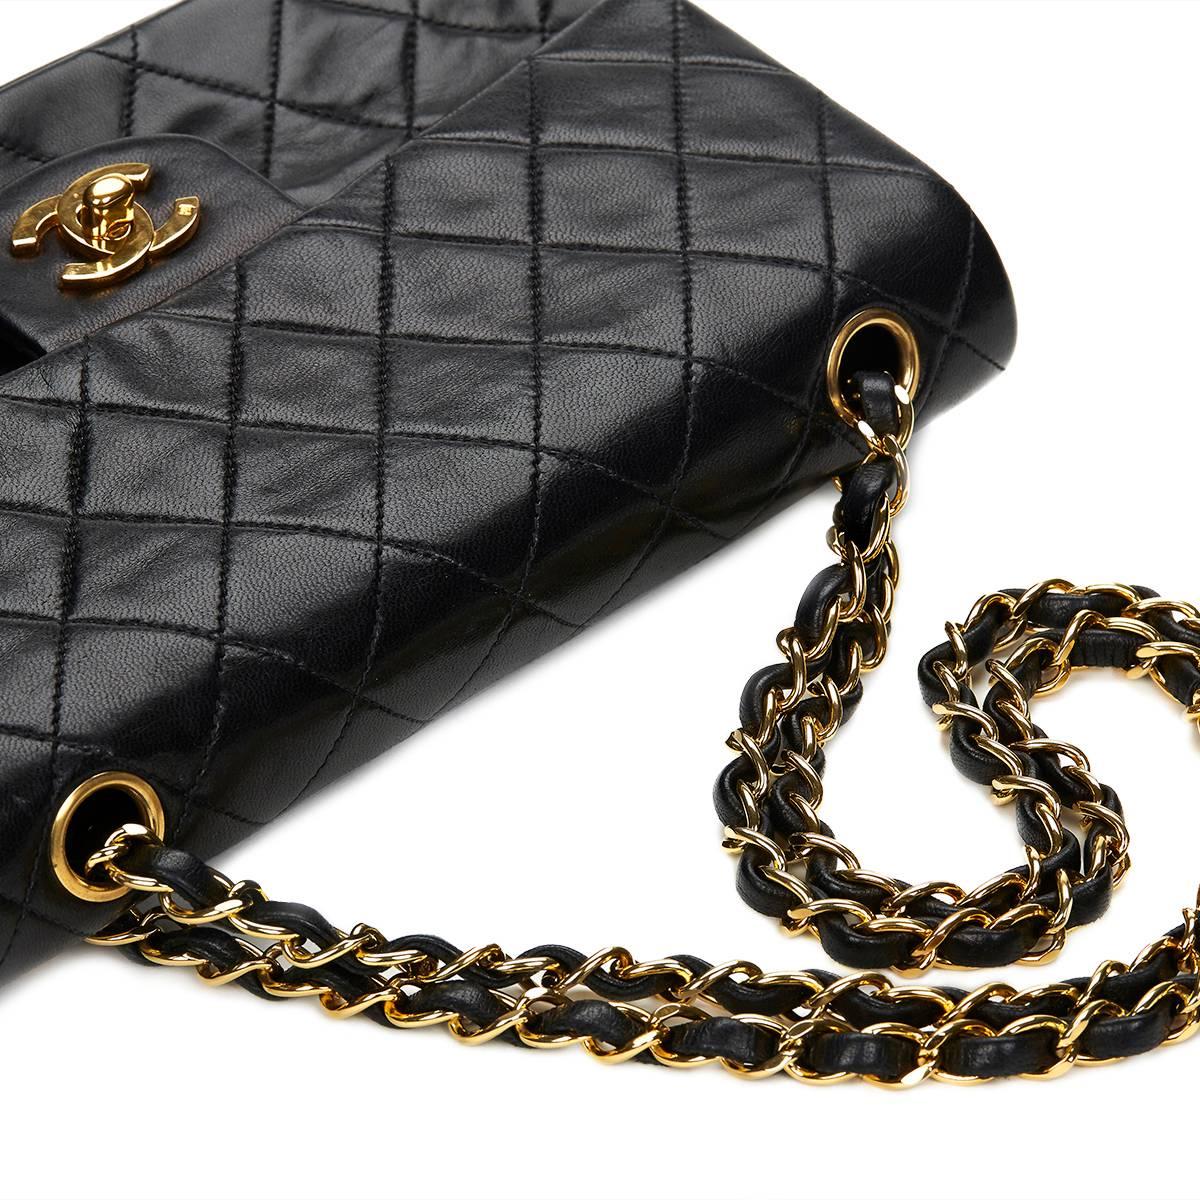 Chanel Black Quilted Lambskin Vintage Small Classic Double Flap Bag 1990s  3